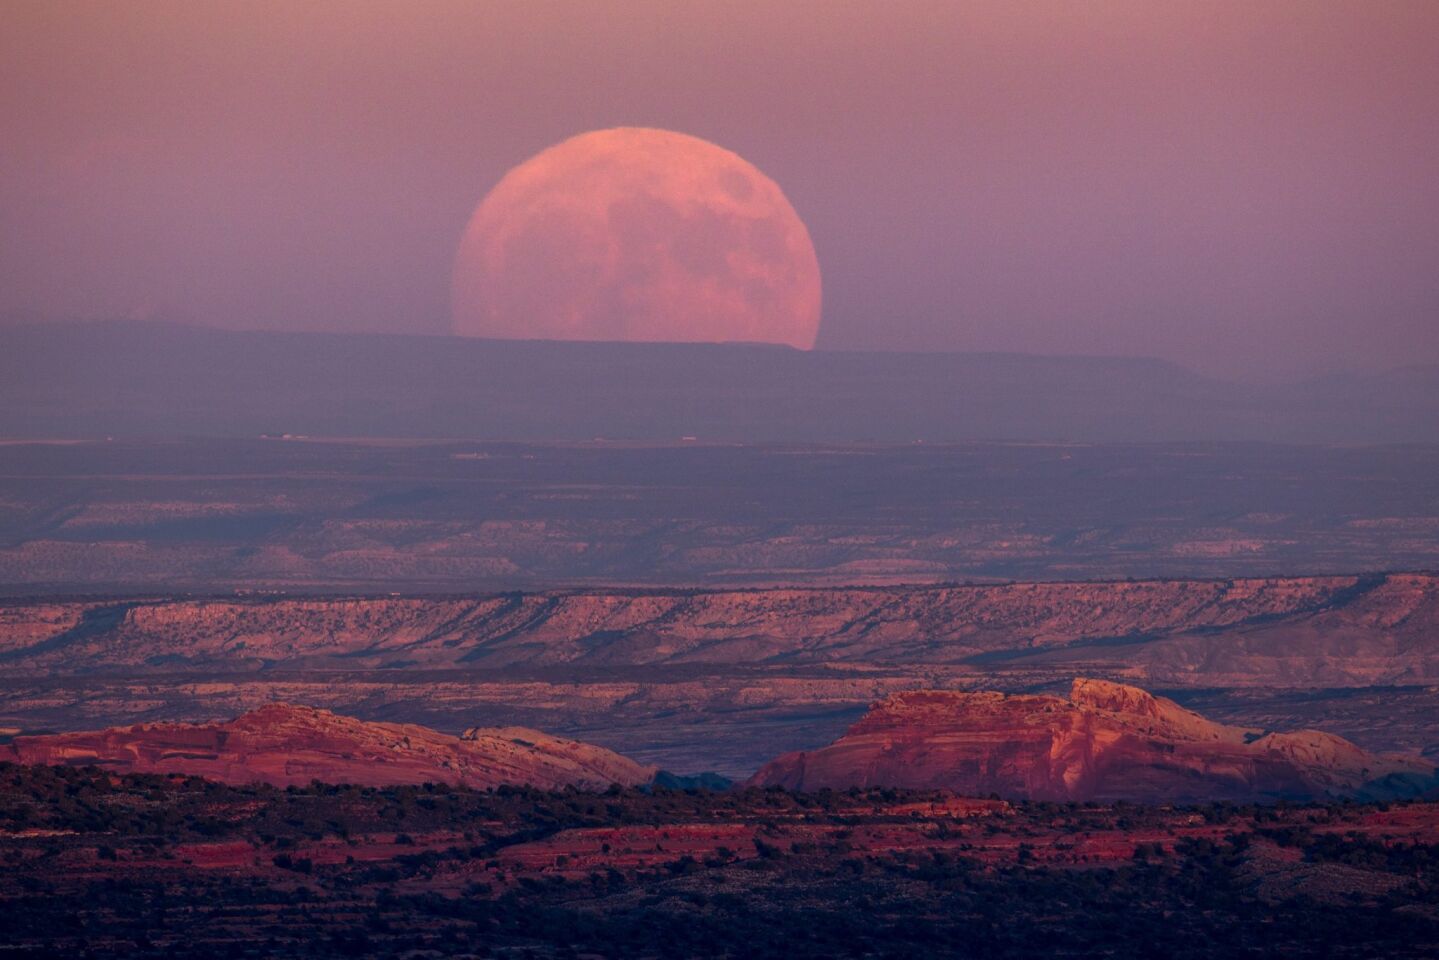 A nearly full moon rises above the Valley of the Gods near Mexican Hat, Utah. November will see the largest full moon since 1948, also known as the 'supermoon,' when the moon reaches its closest point to Earth.